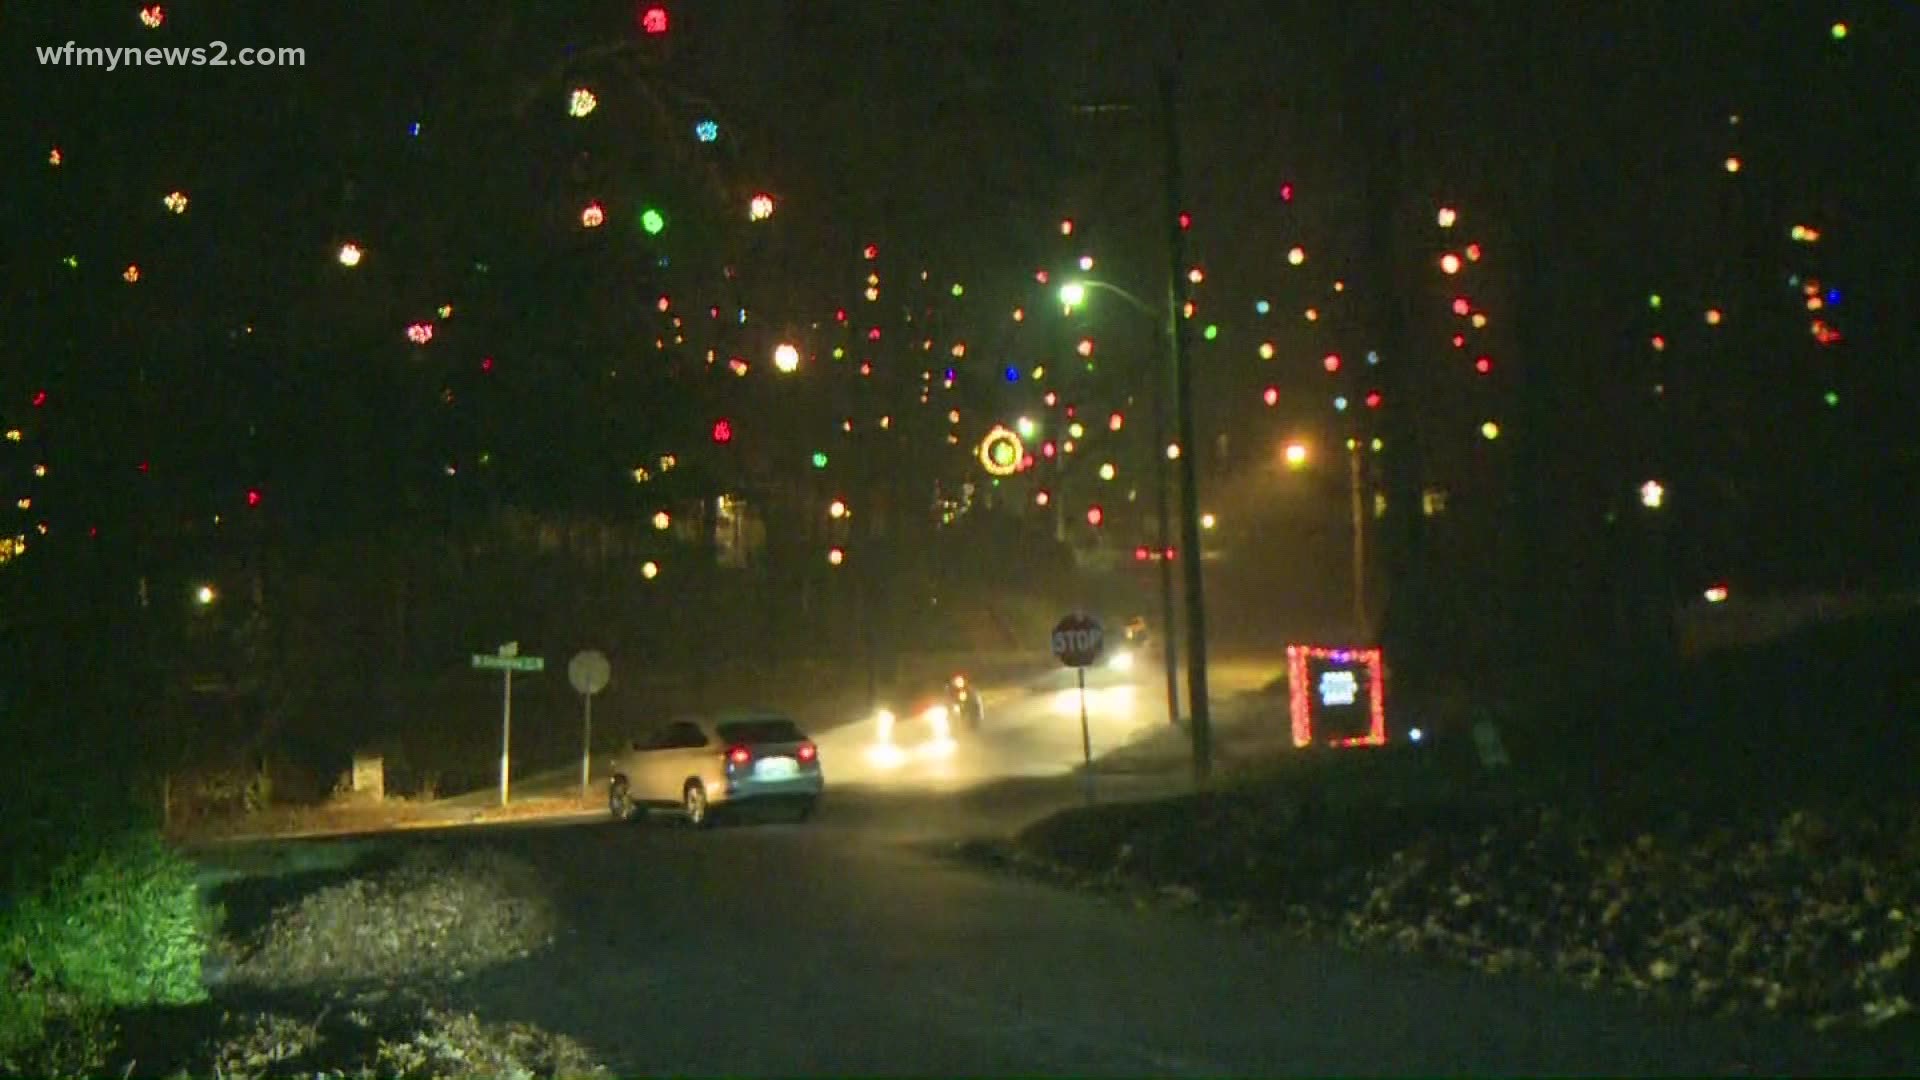 Sunset Hills neighborhood in Greensboro puts up their famous Christmas